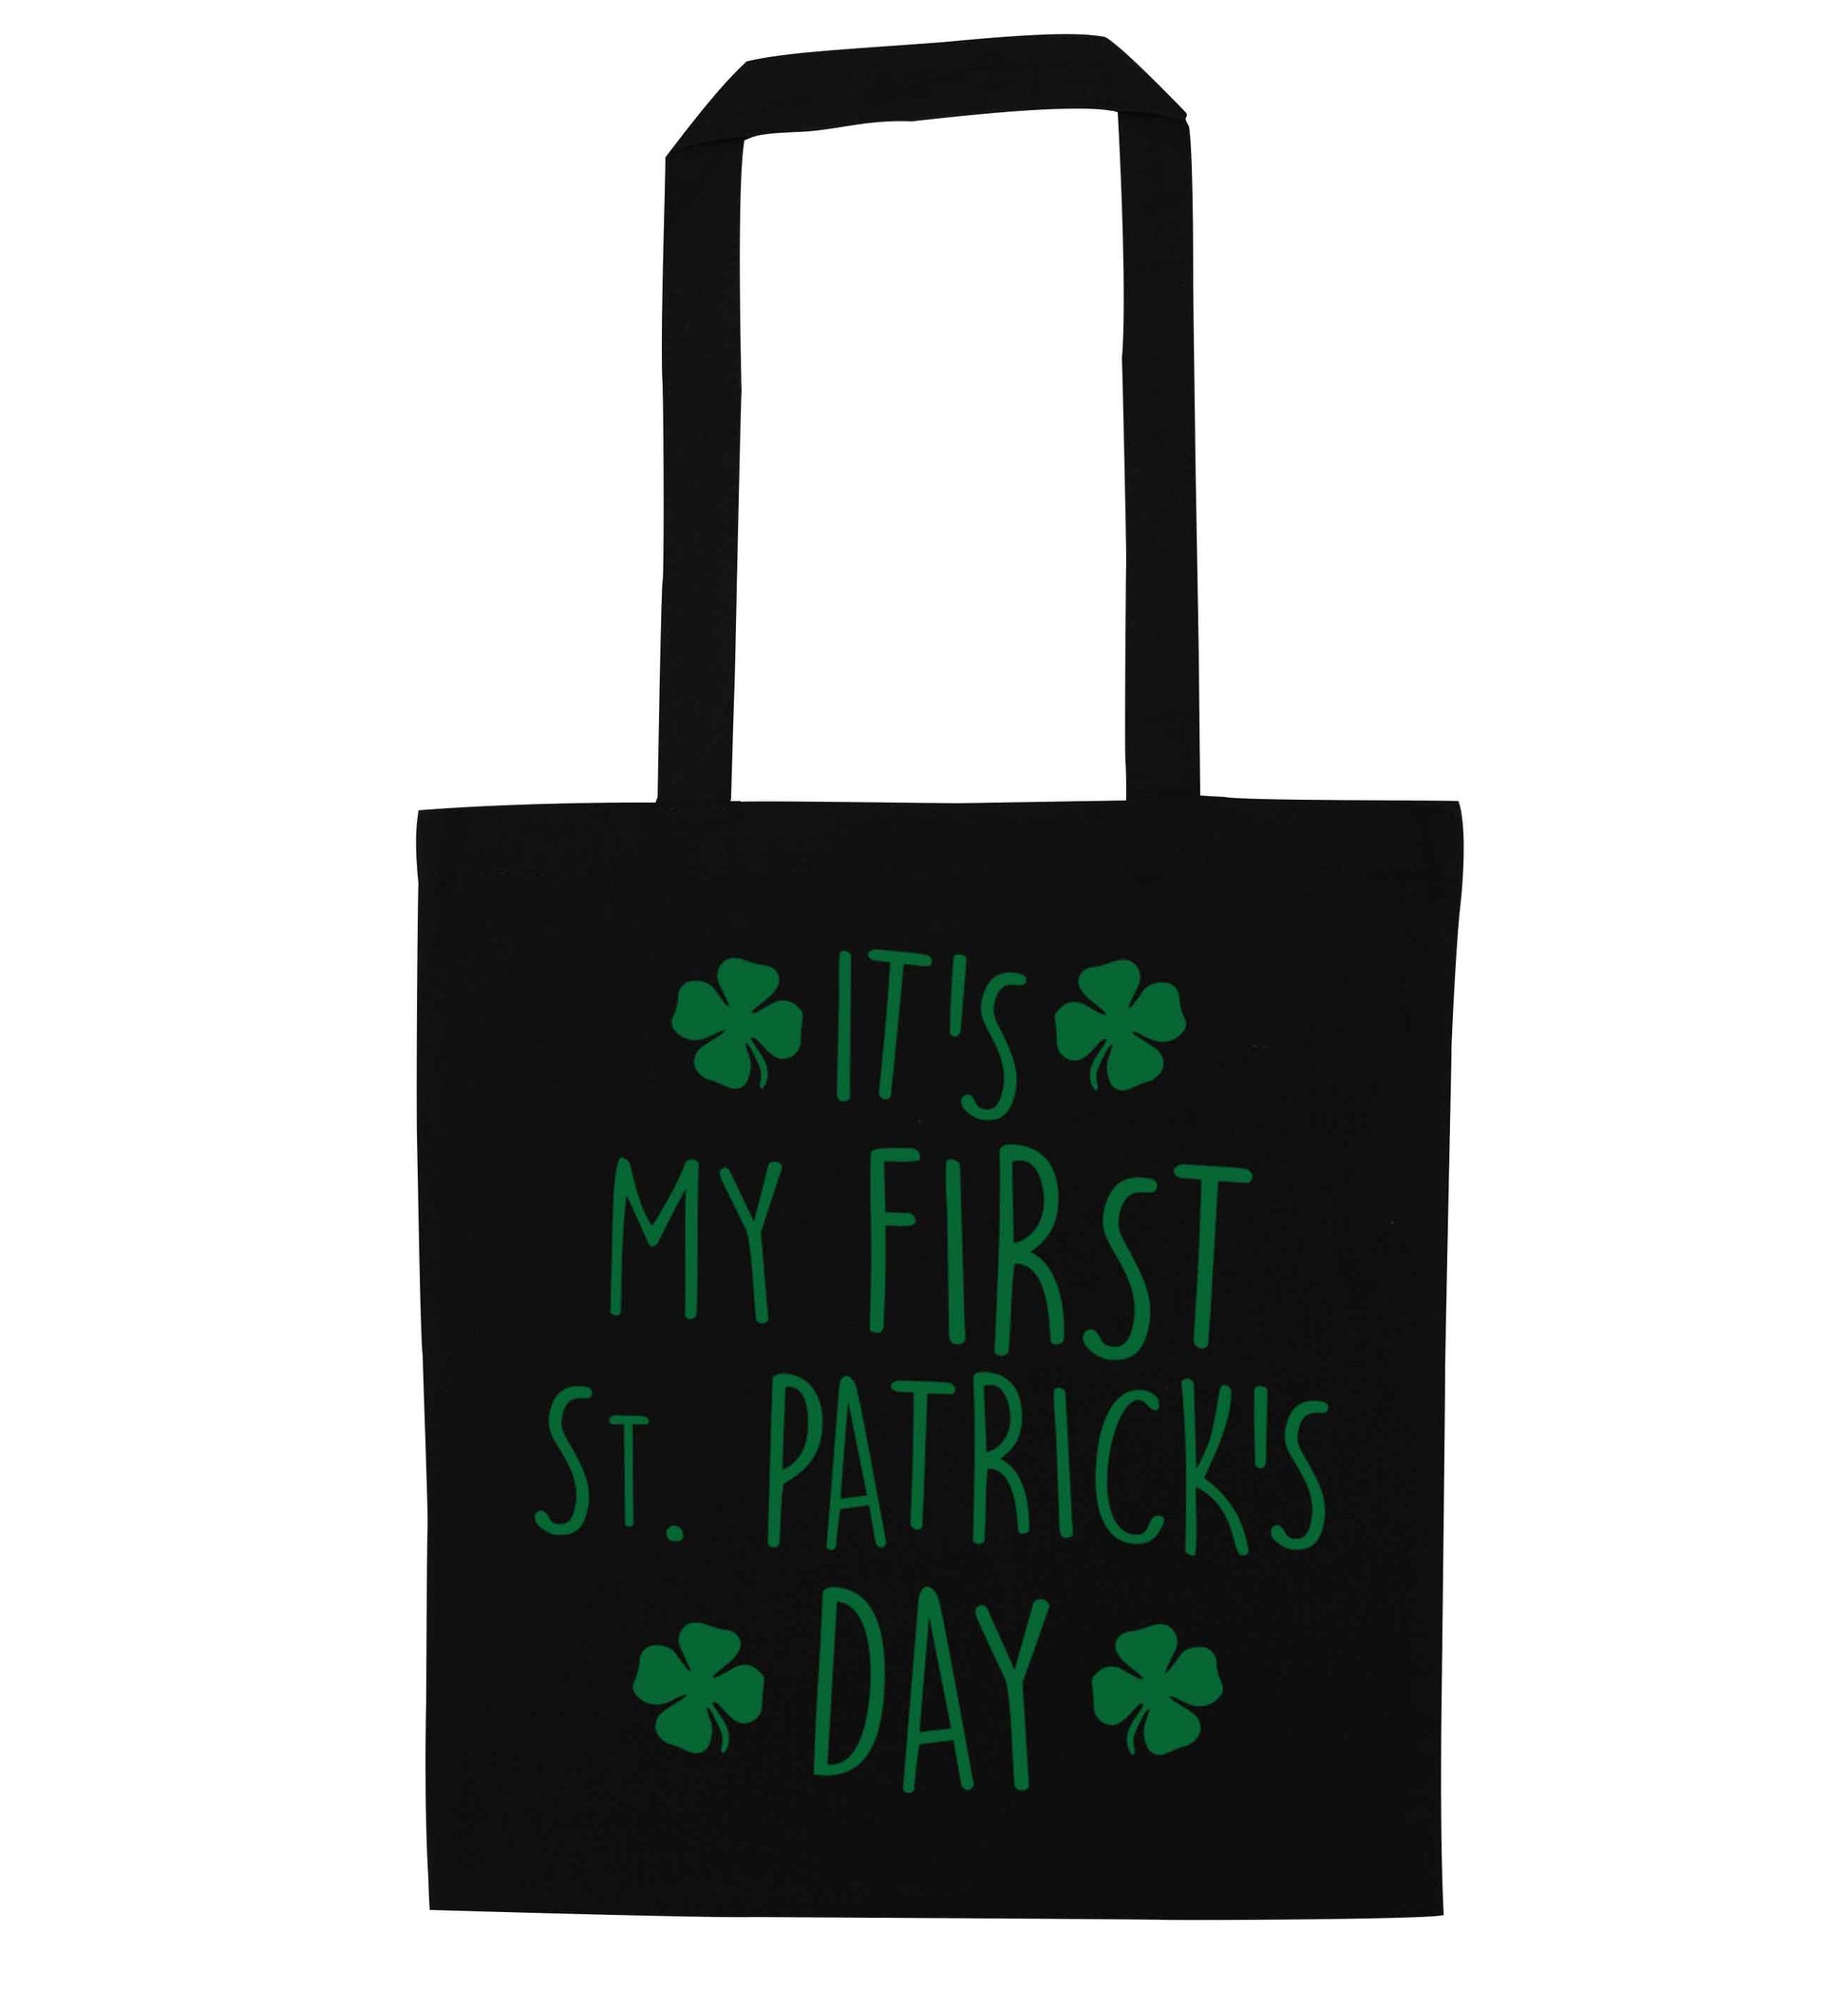 It's my first St.Patrick's day black tote bag